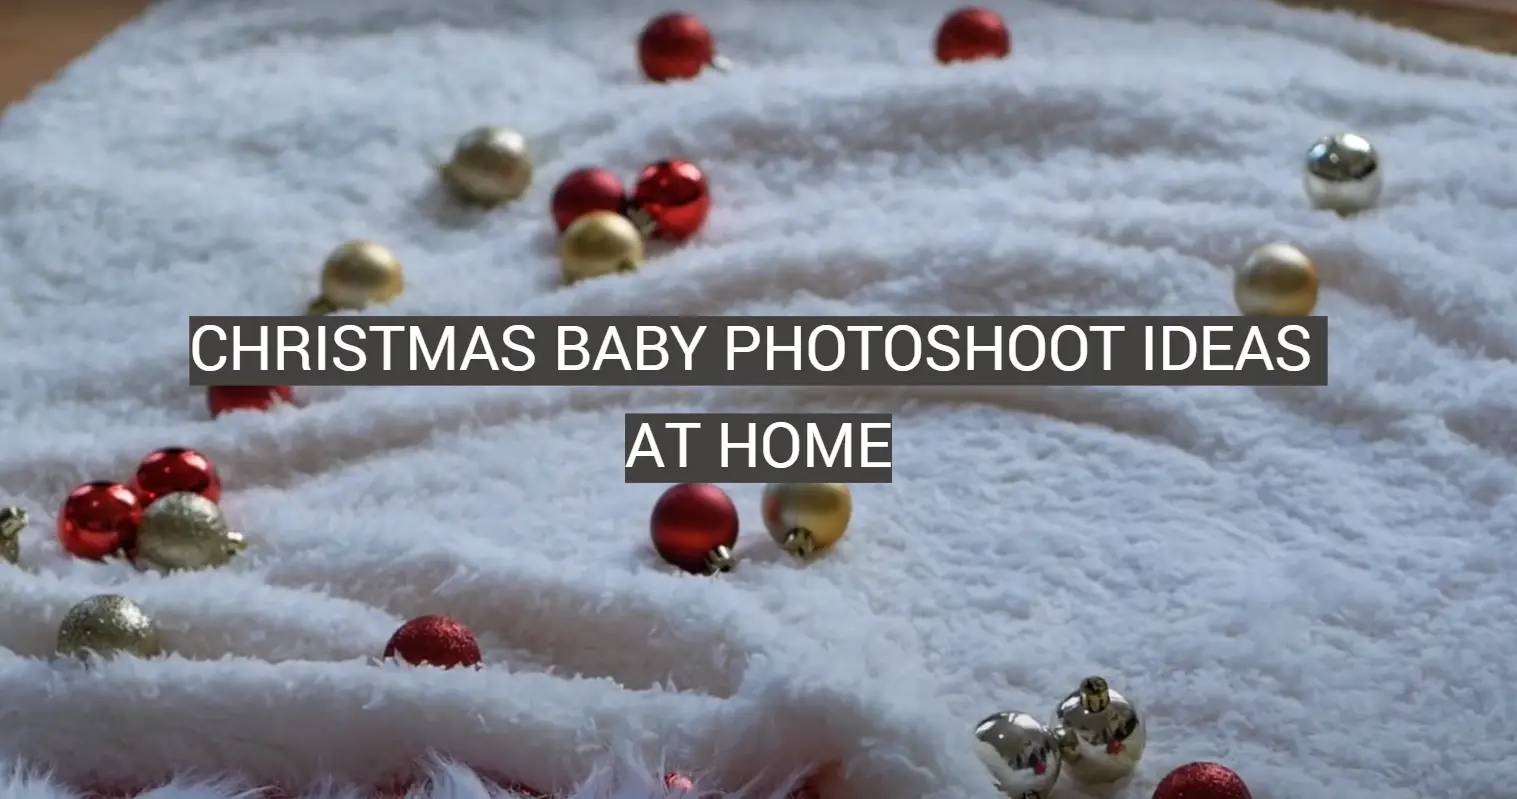 Christmas Baby Photoshoot Ideas at Home